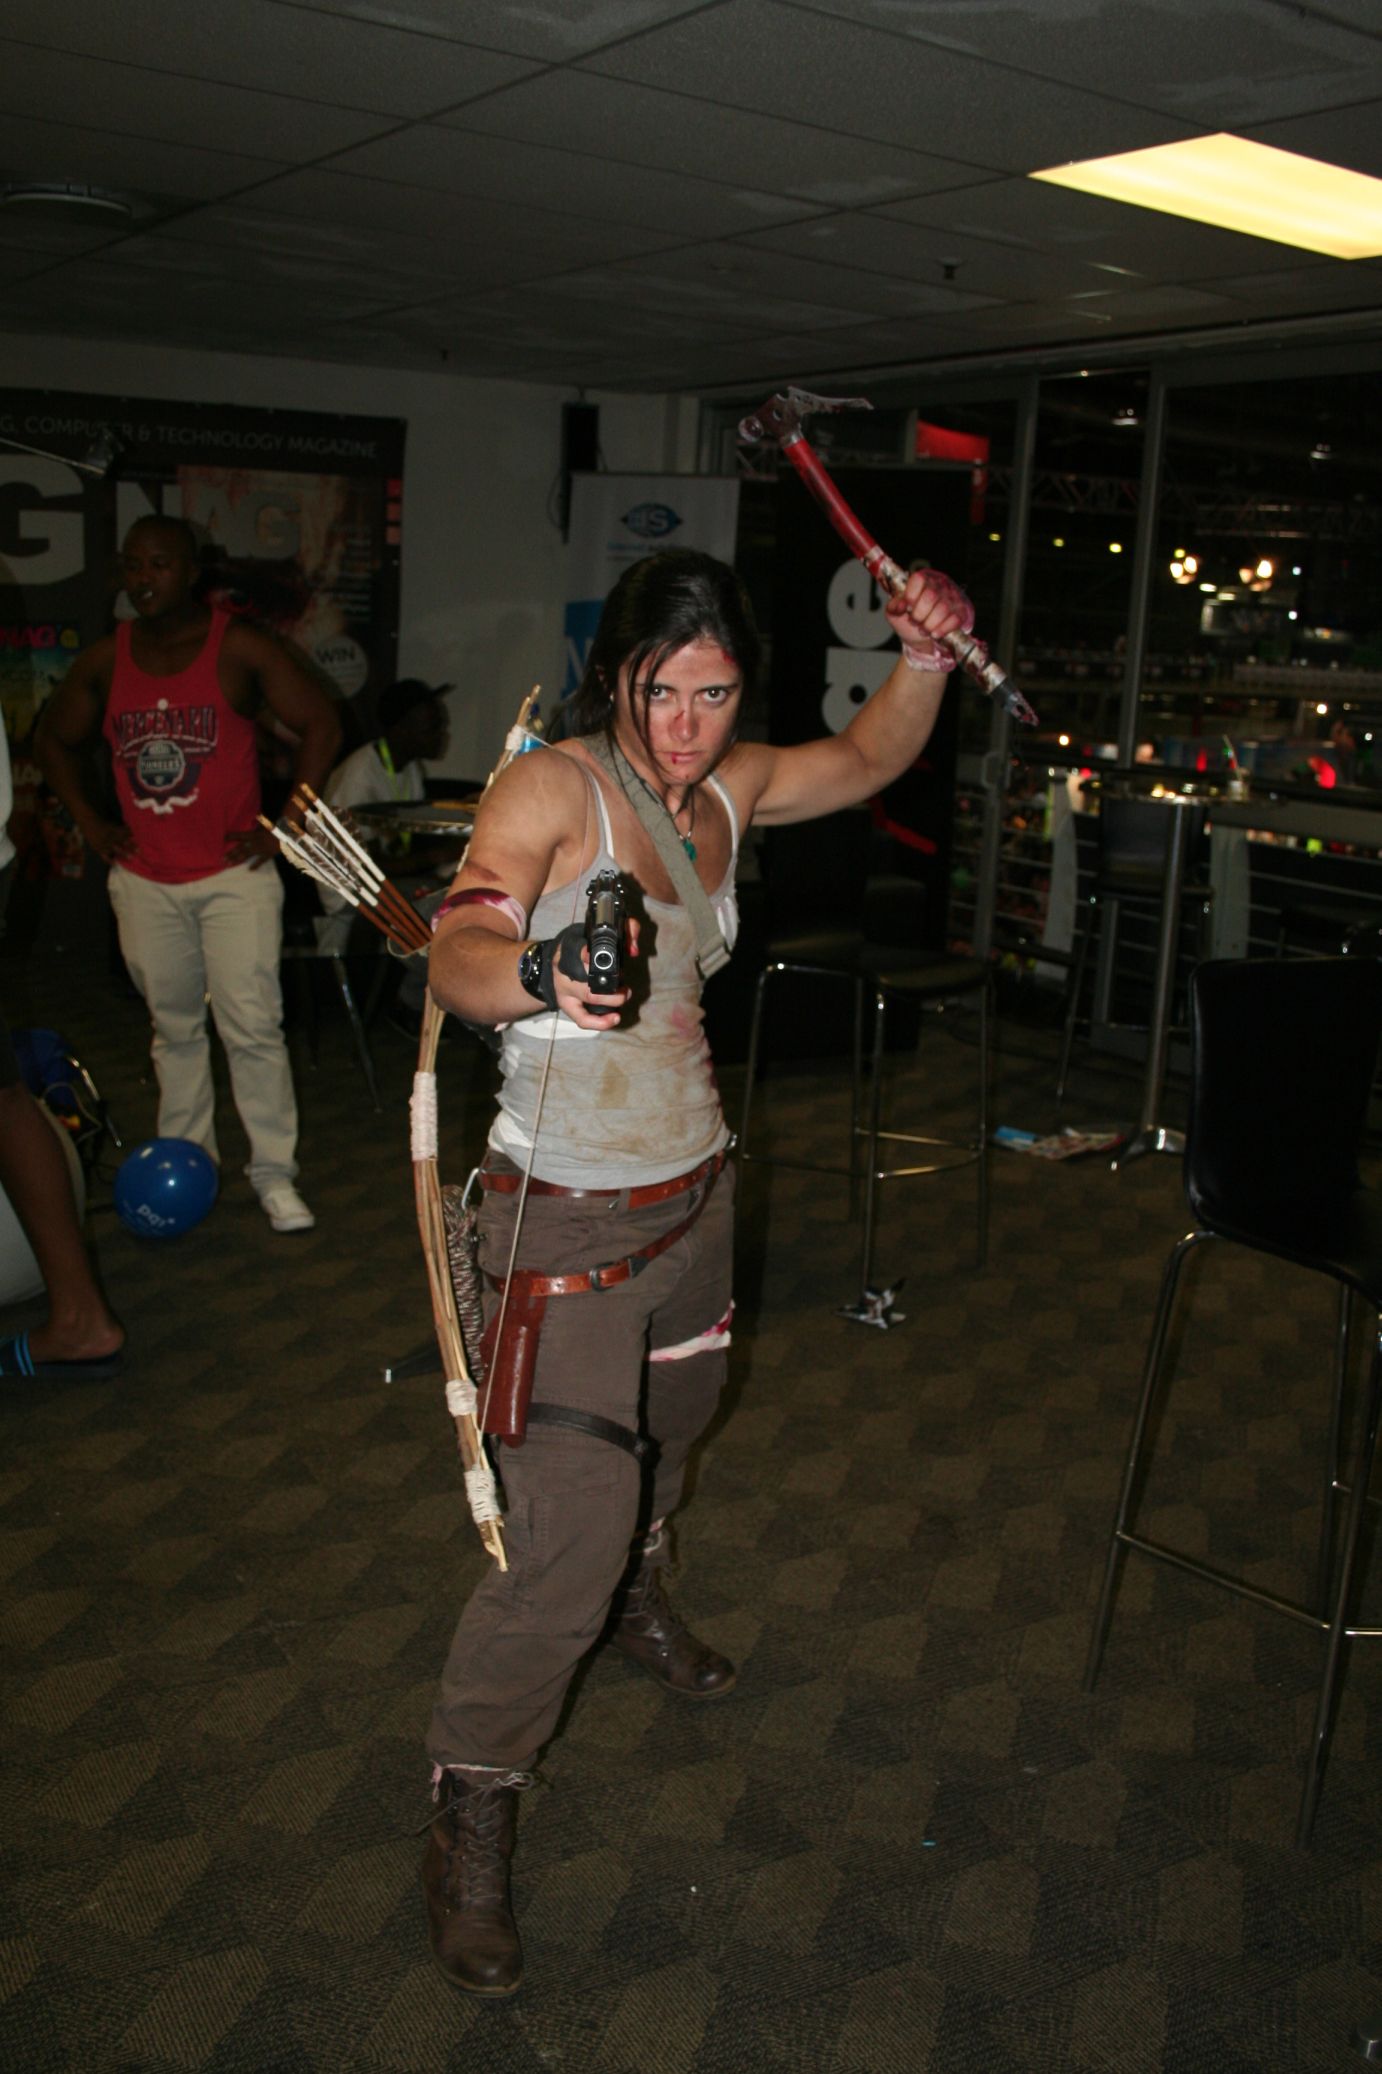 Tomb Raider, well - A South African one at least